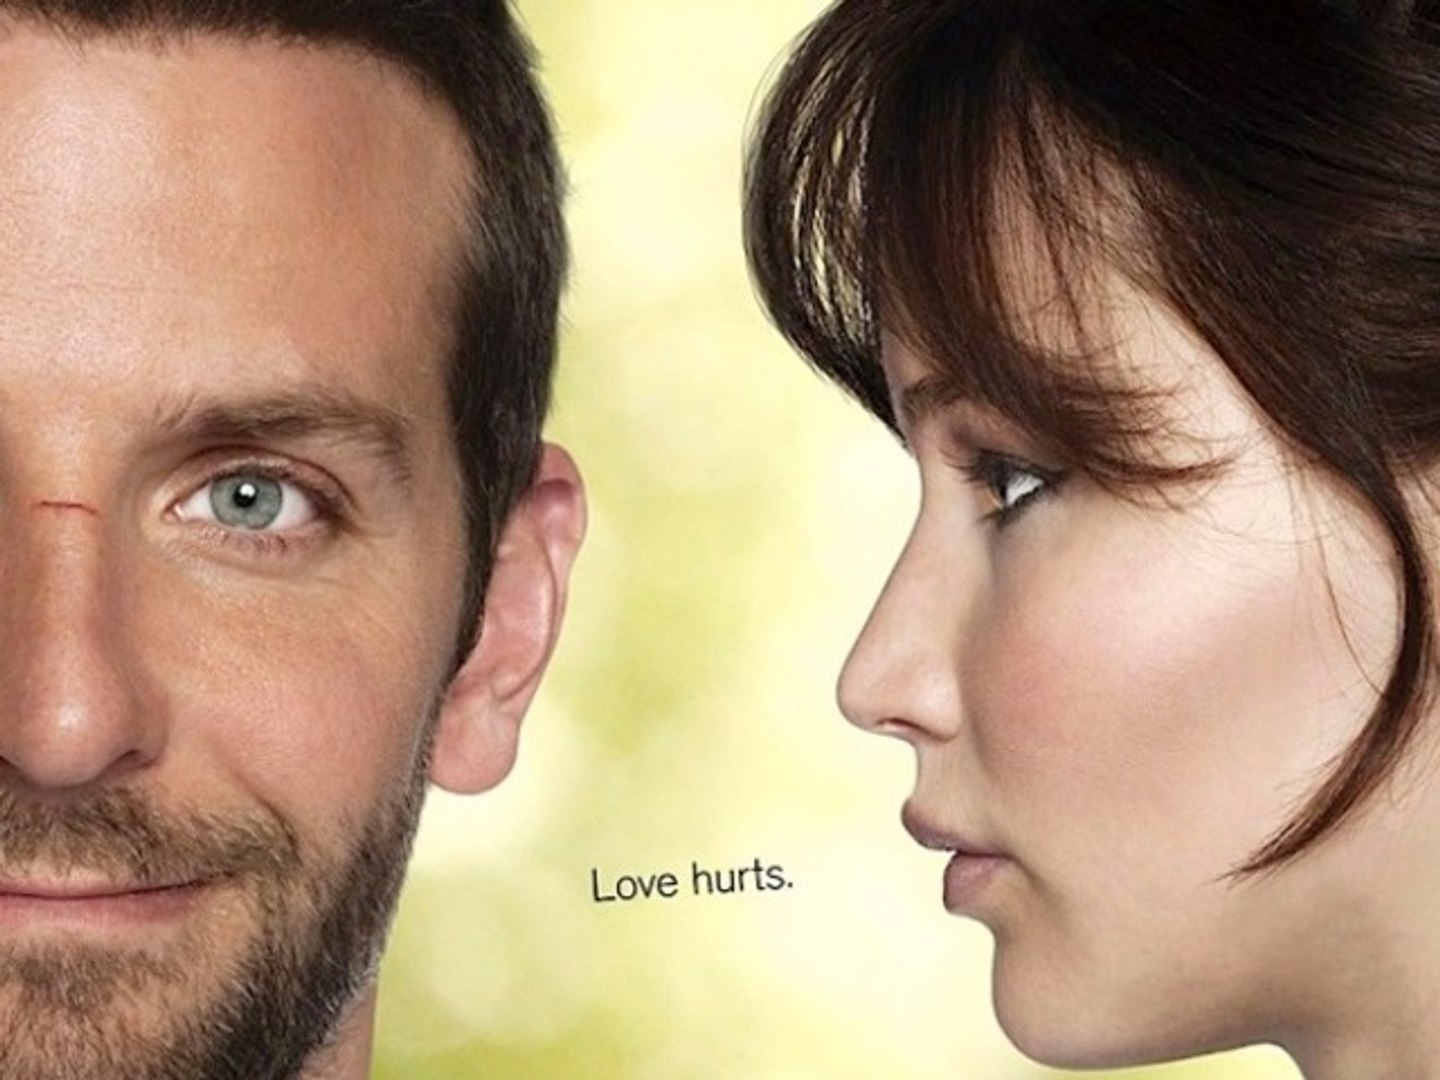 Silver Linings Playbook - Final Trailer - video Dailymotion